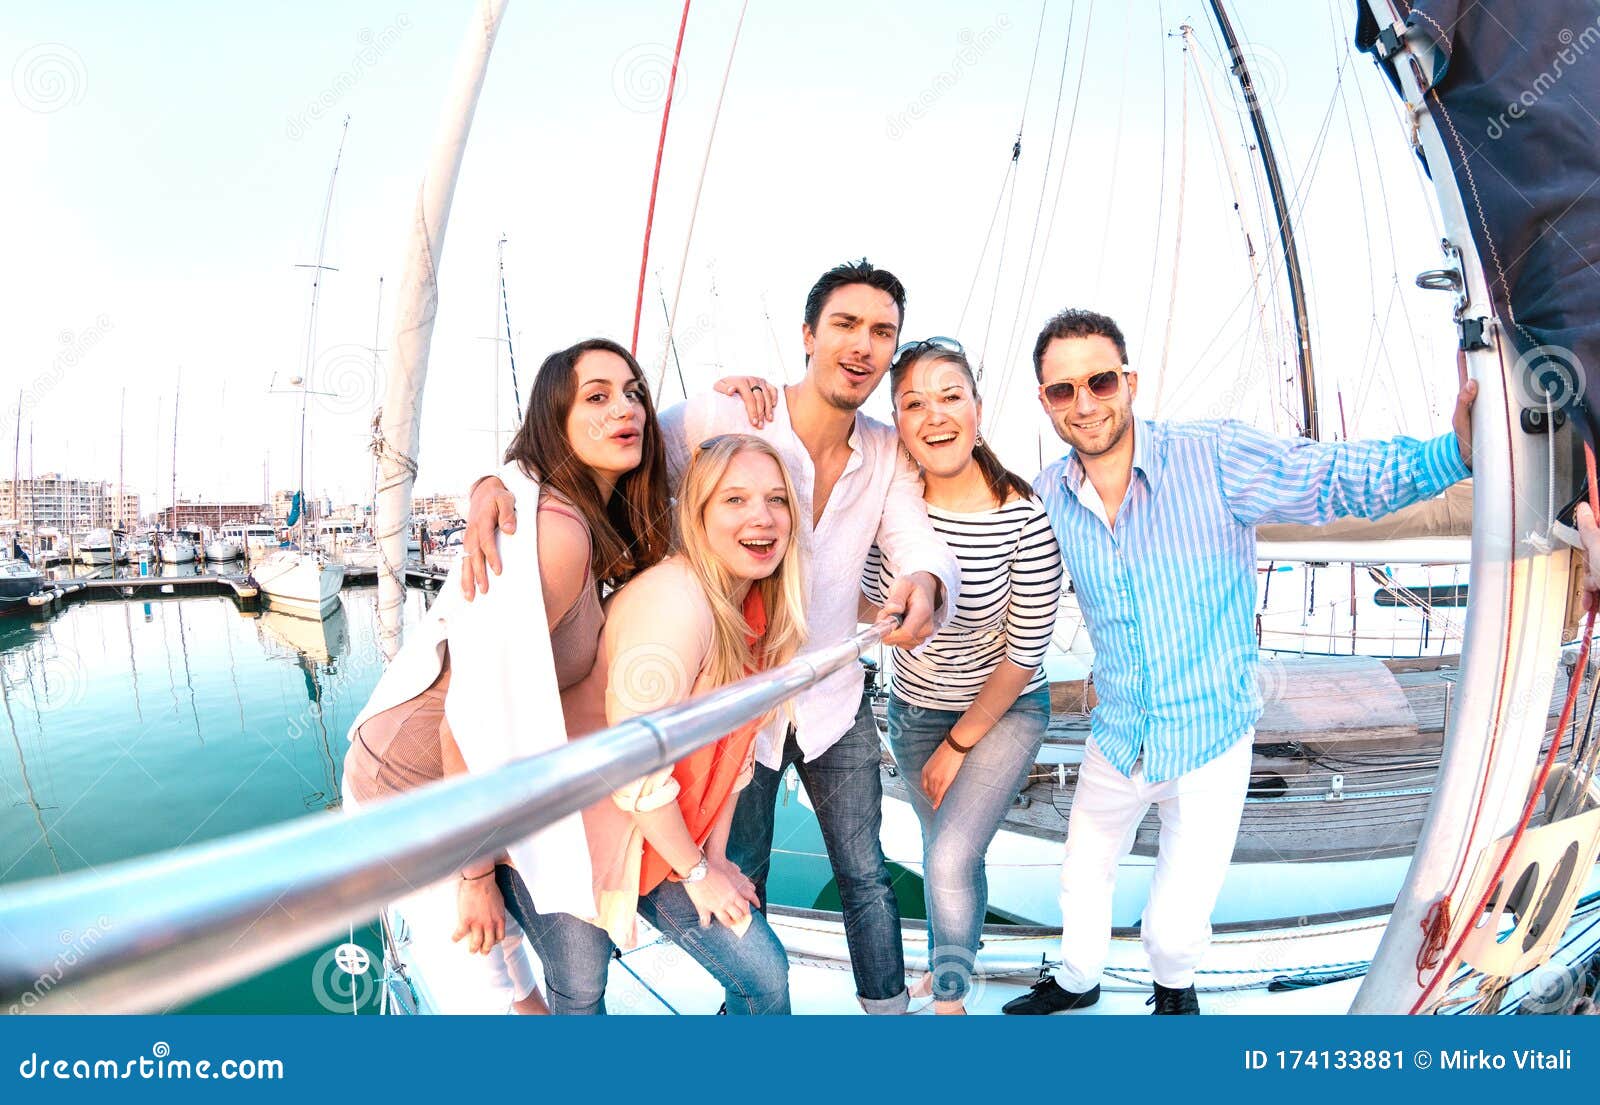 friends group taking selfie pic with stick on luxury sailing boat party trip - friendship concept with young millenial people